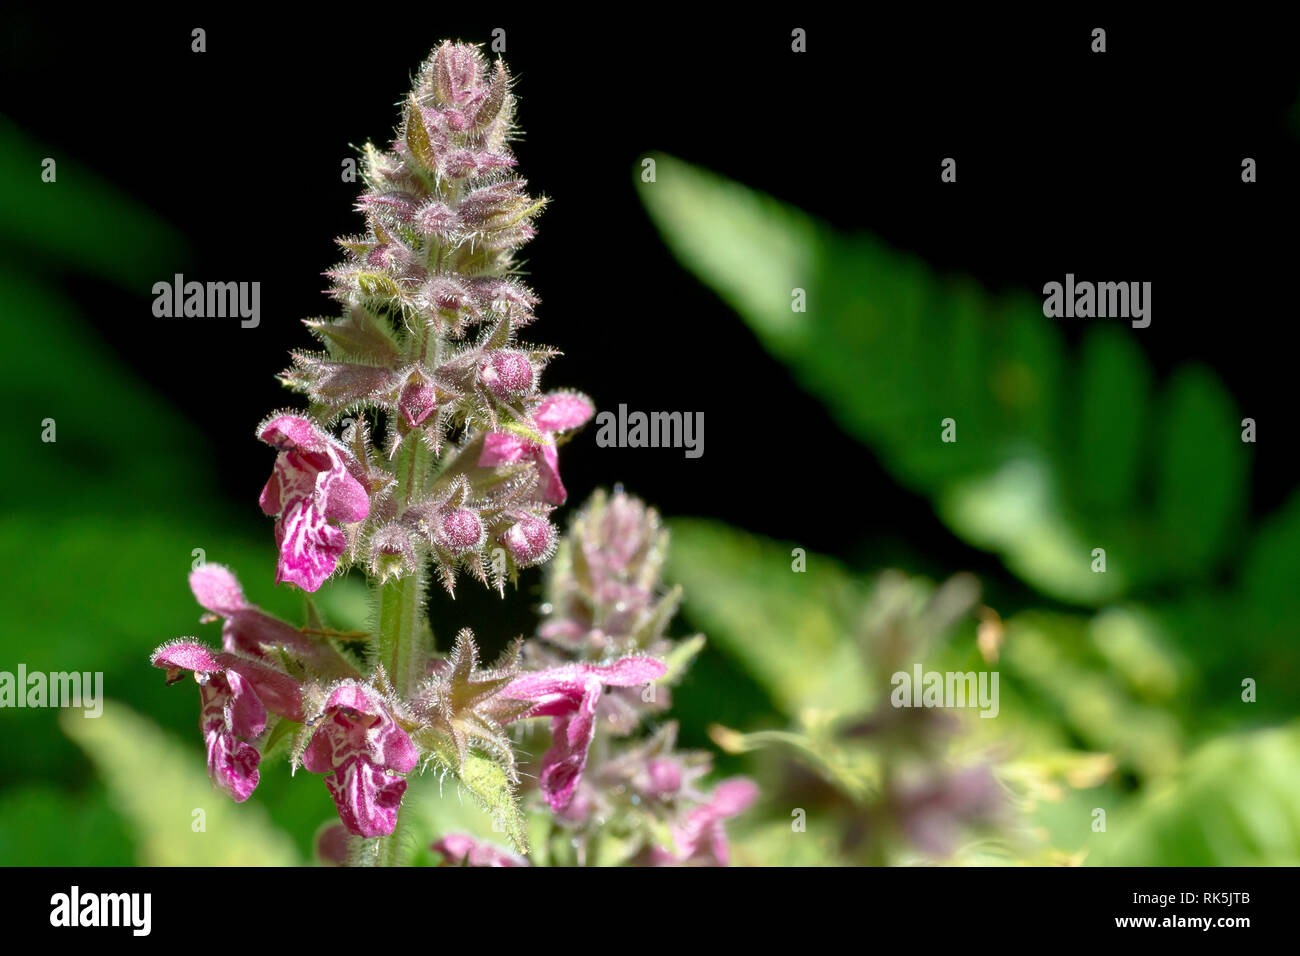 Hedge Woundwort (stachys sylvatica), close up of a solitary flower spike against a shadowed background. Stock Photo